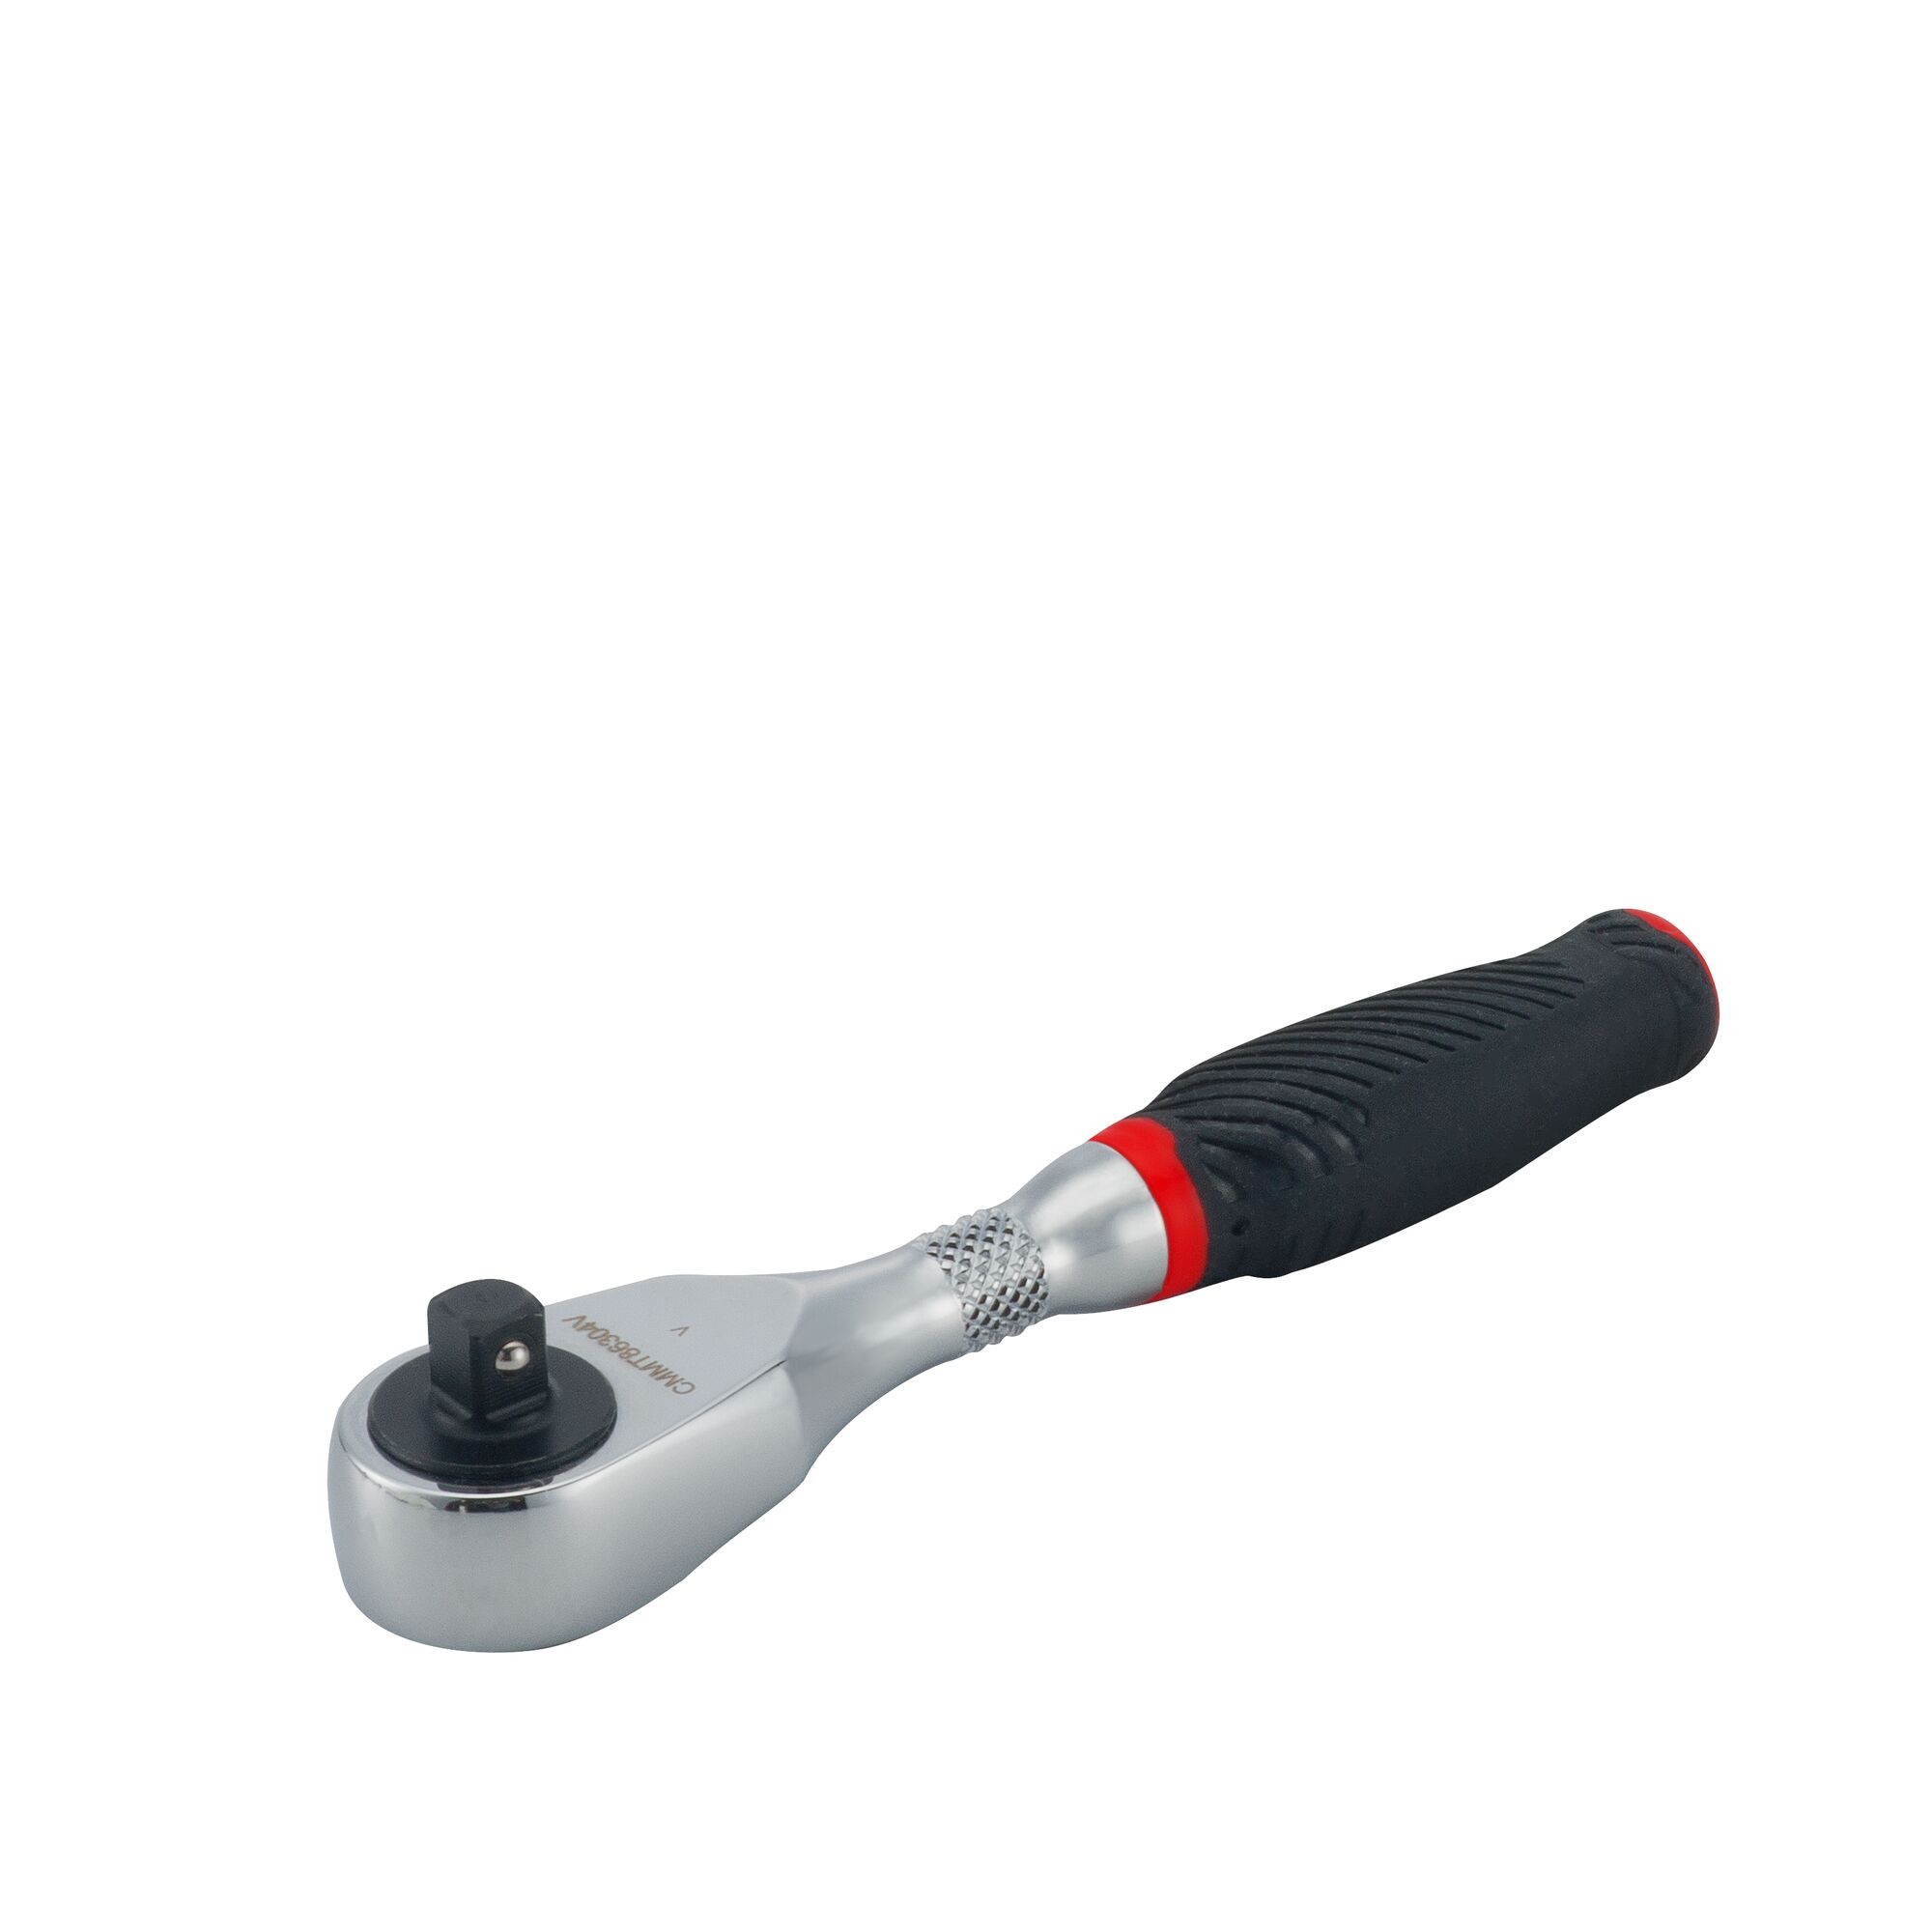 Right profile of V series quarter inch drive comfort grip ratchet.